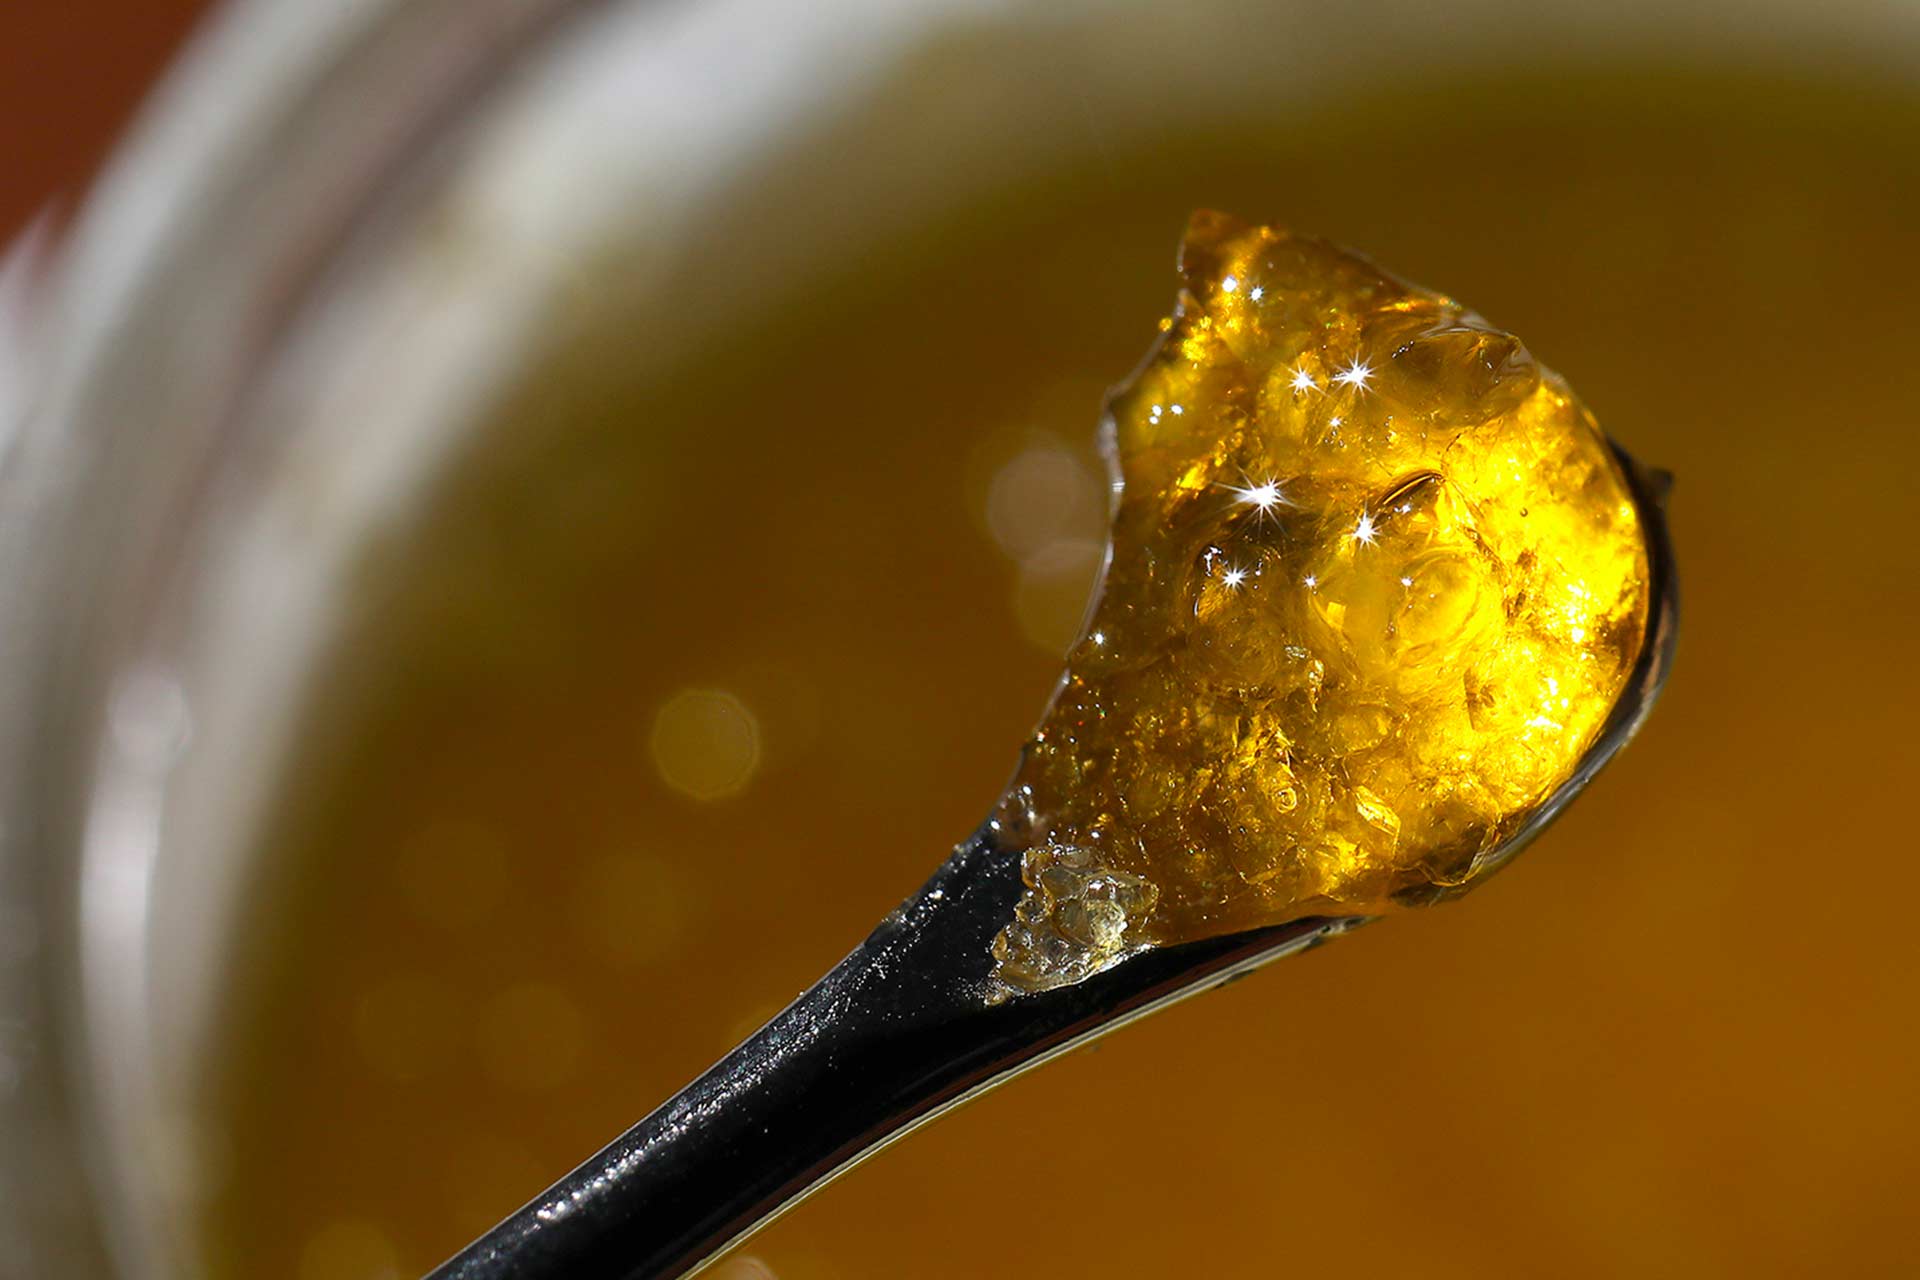 Seed & Smith live resin cannabis concentrate shown on the end of a dabber scoop.